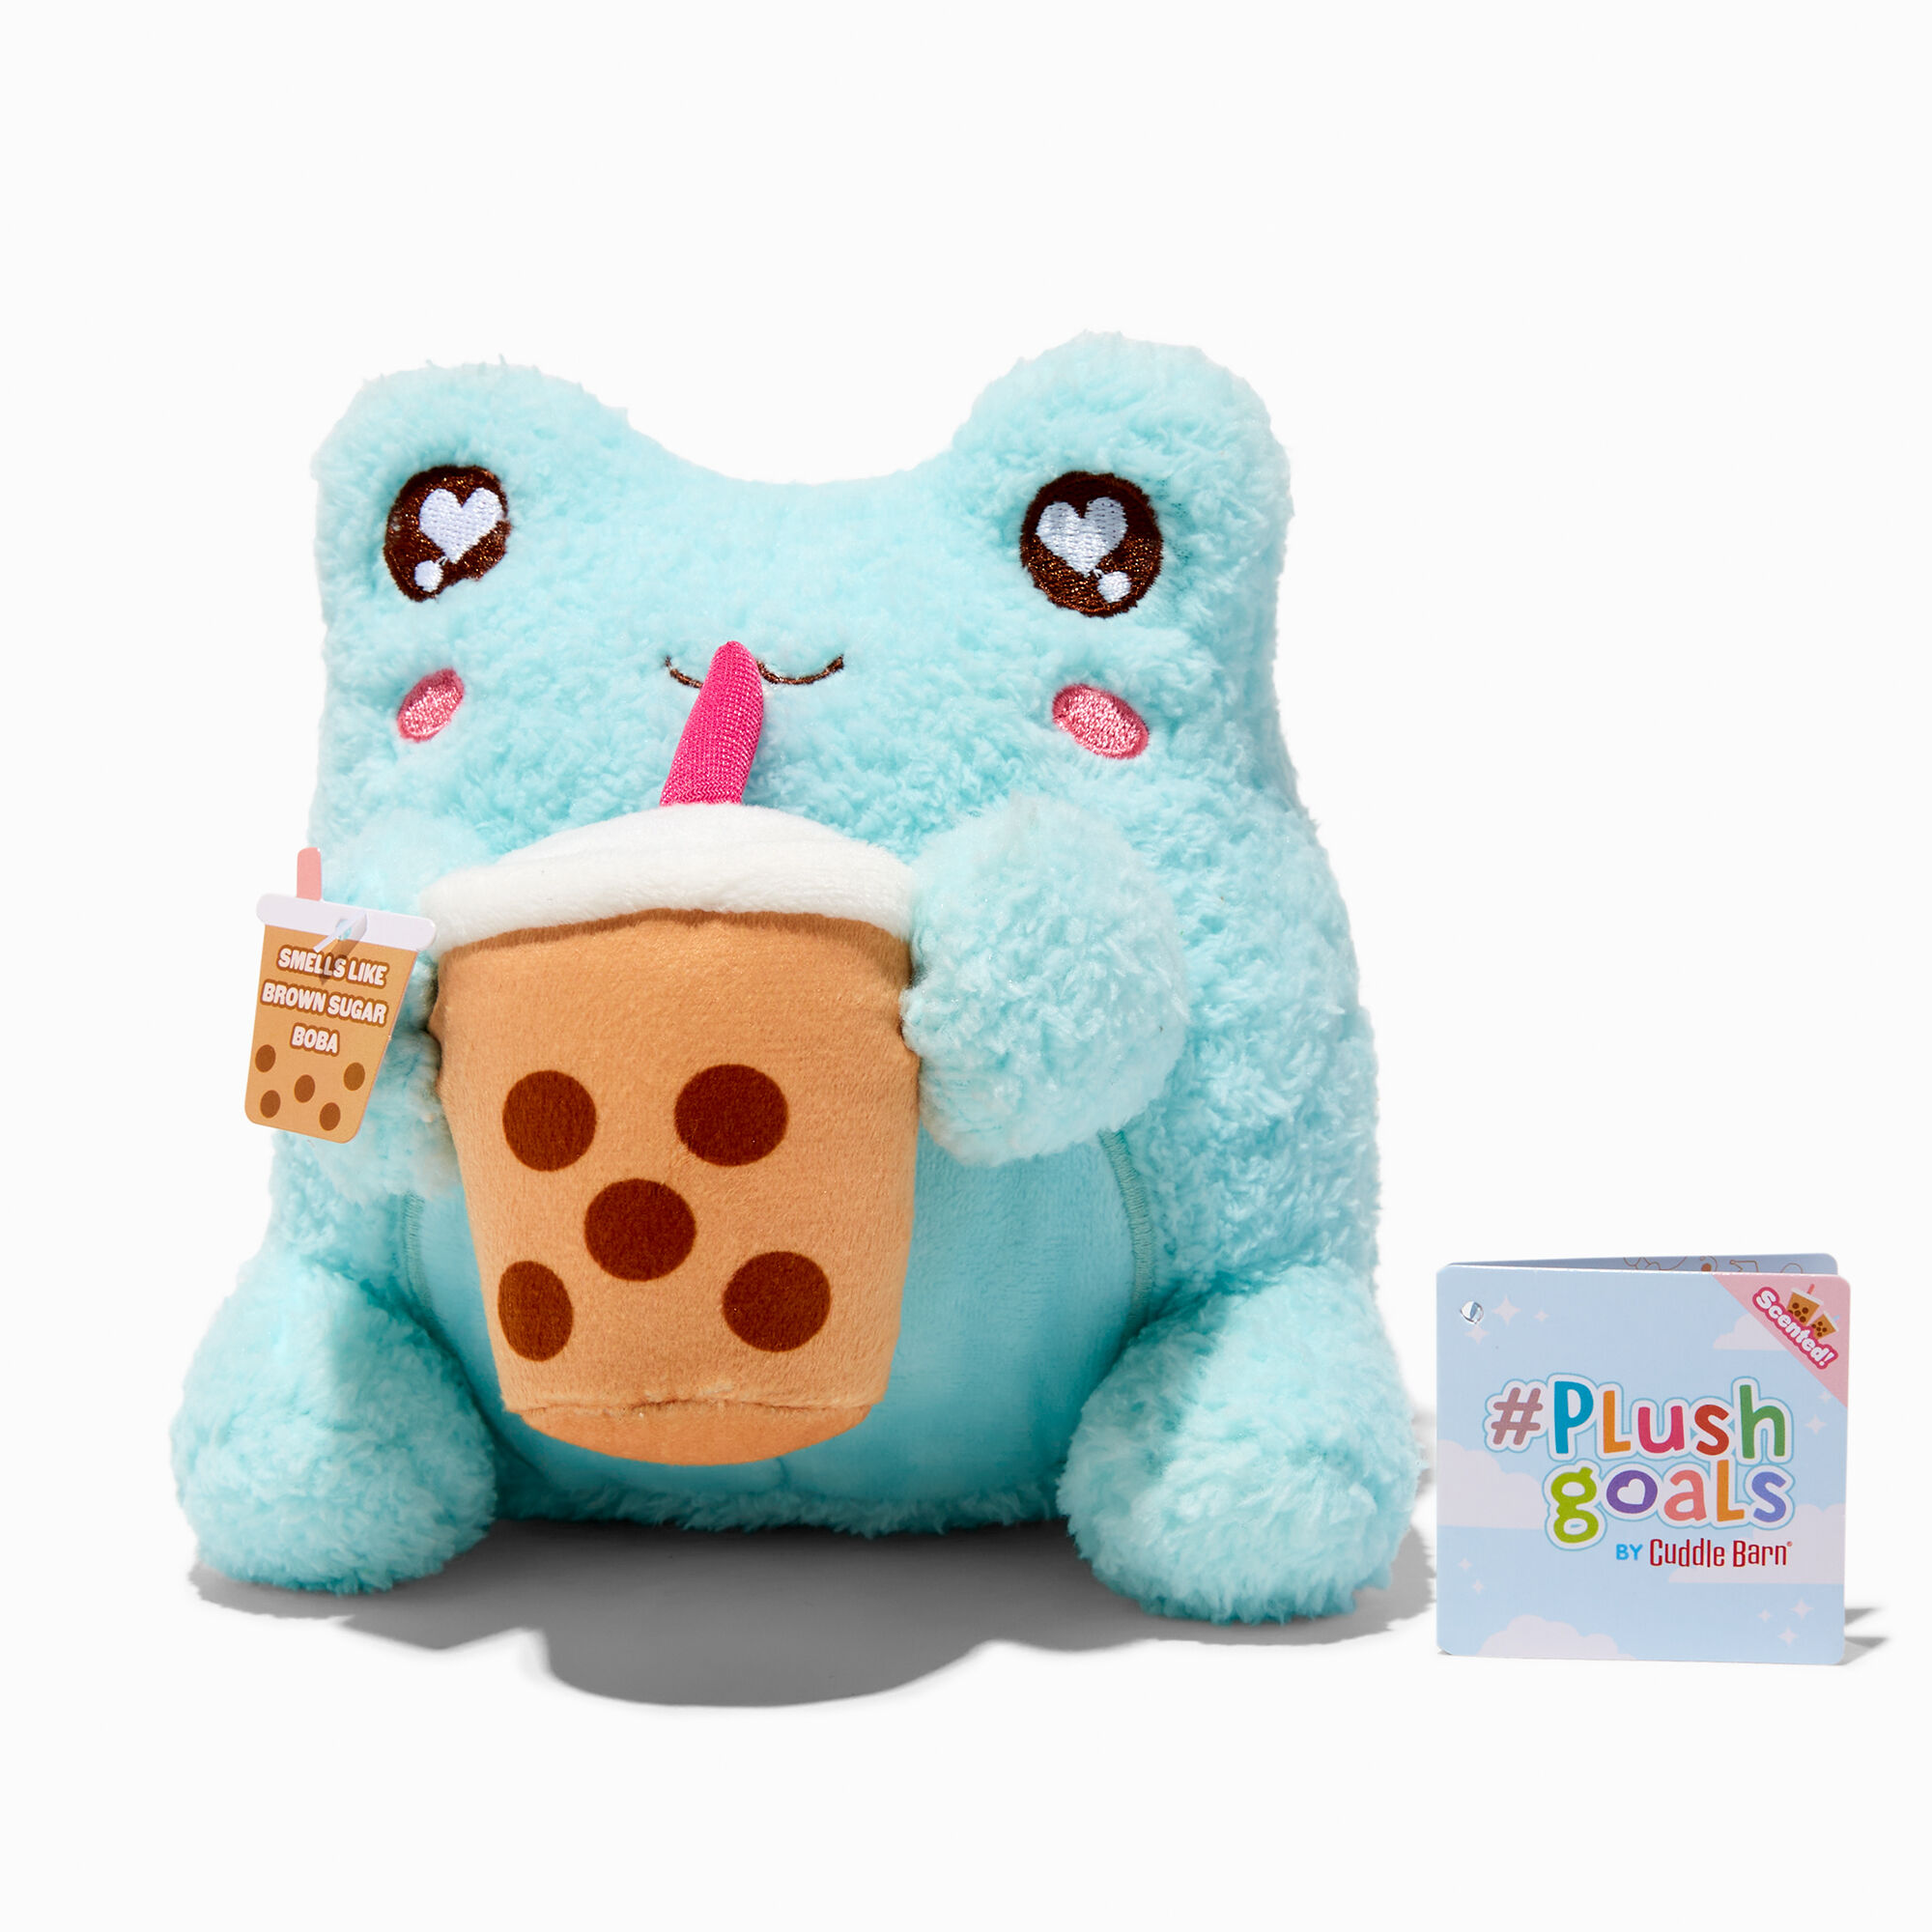 View Claires plush Goals By Cuddle Barn 9 Boba Wawa Plush Toy information